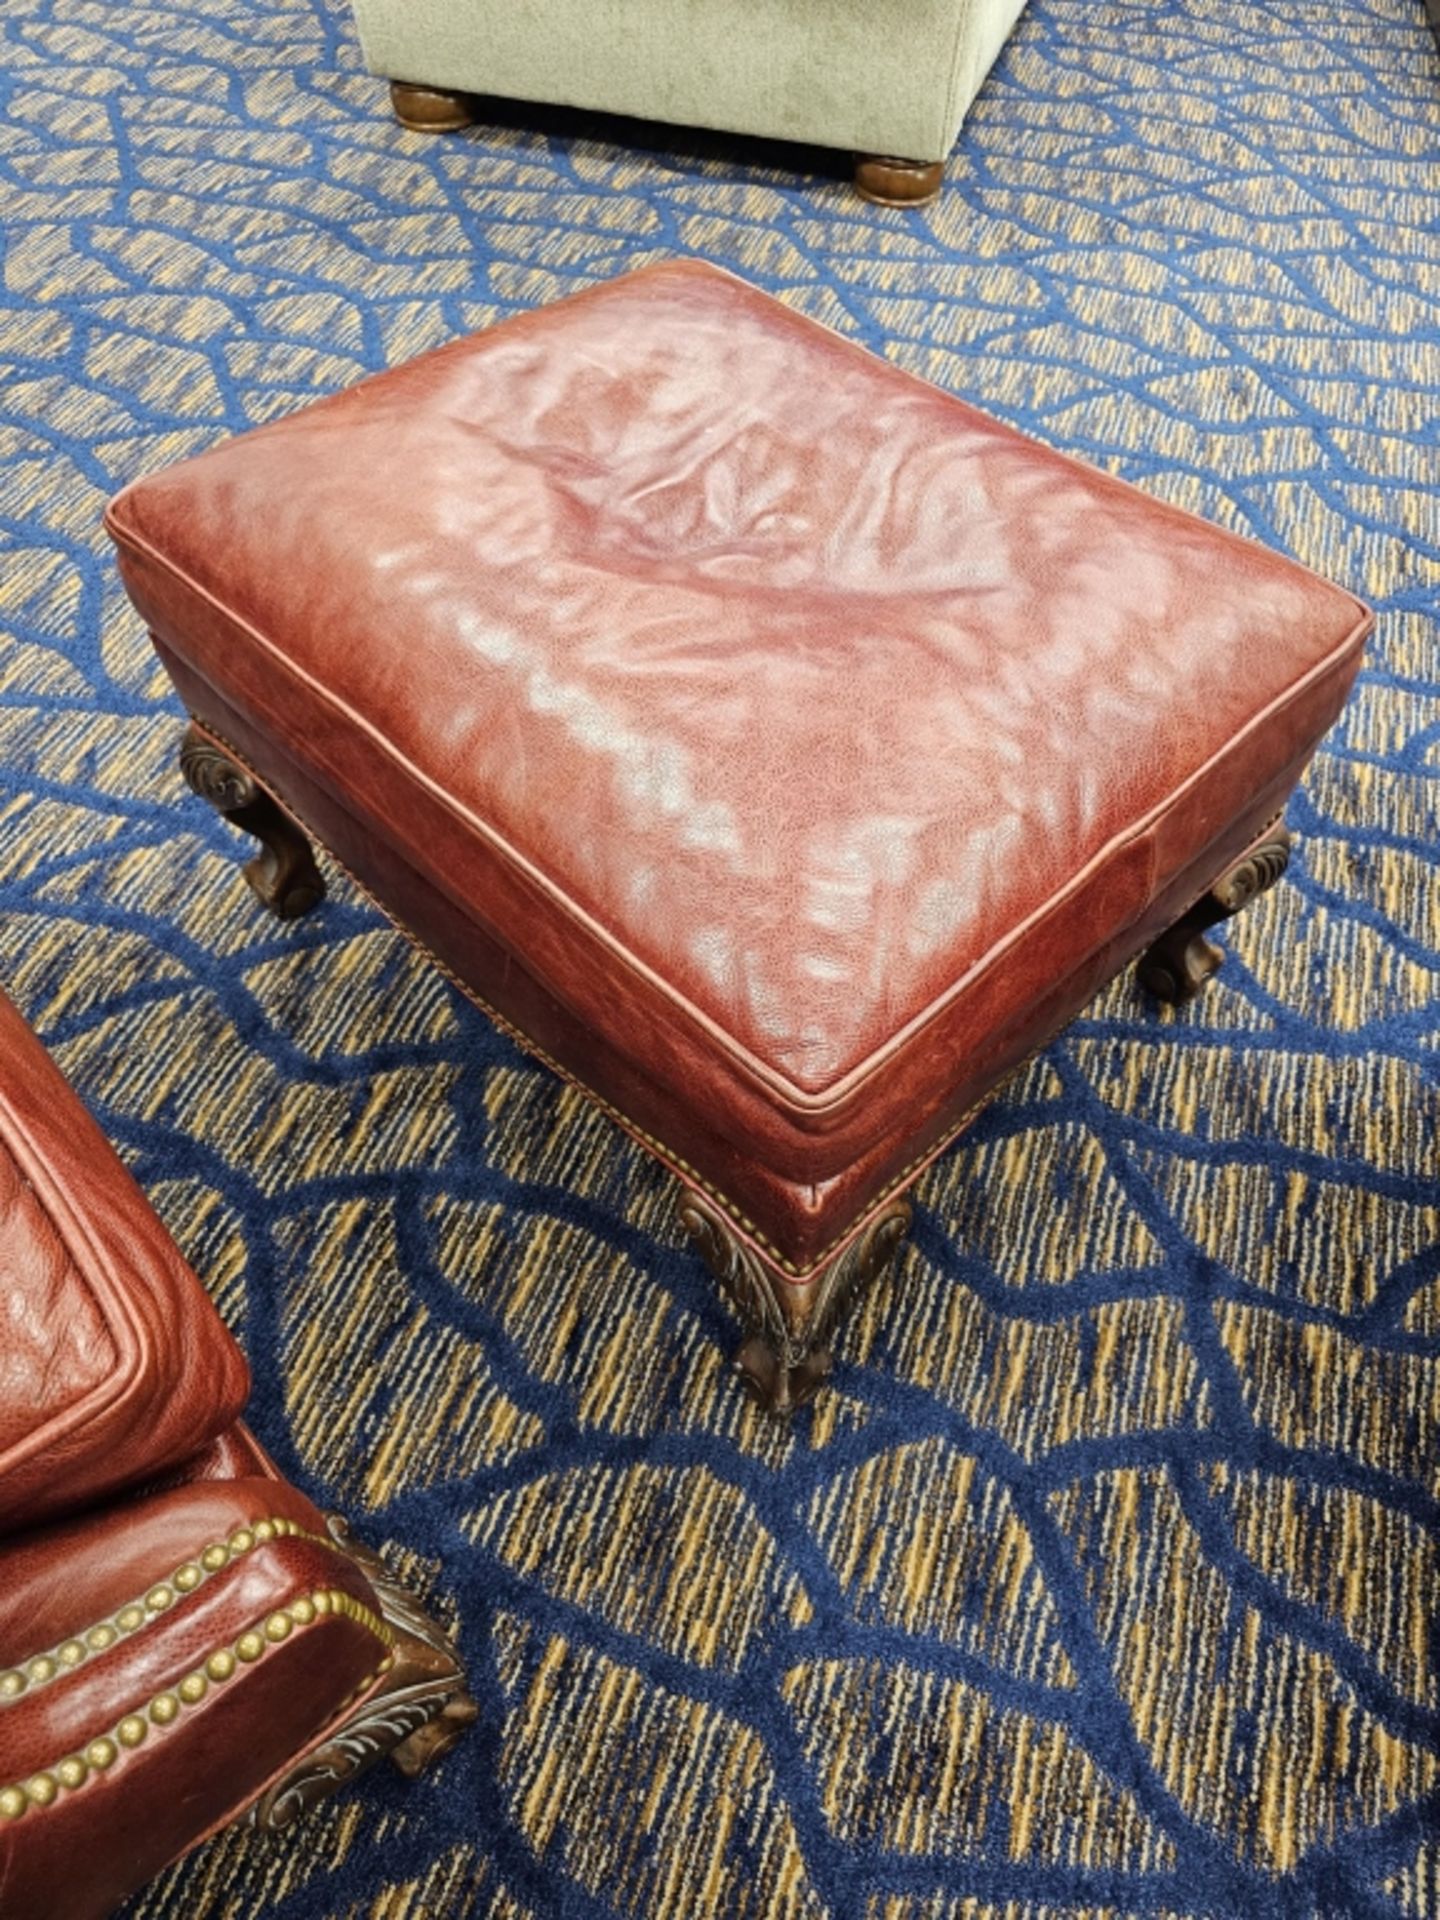 (2) Robb & Stucky Leather Chairs With Foot Stools - Image 6 of 11